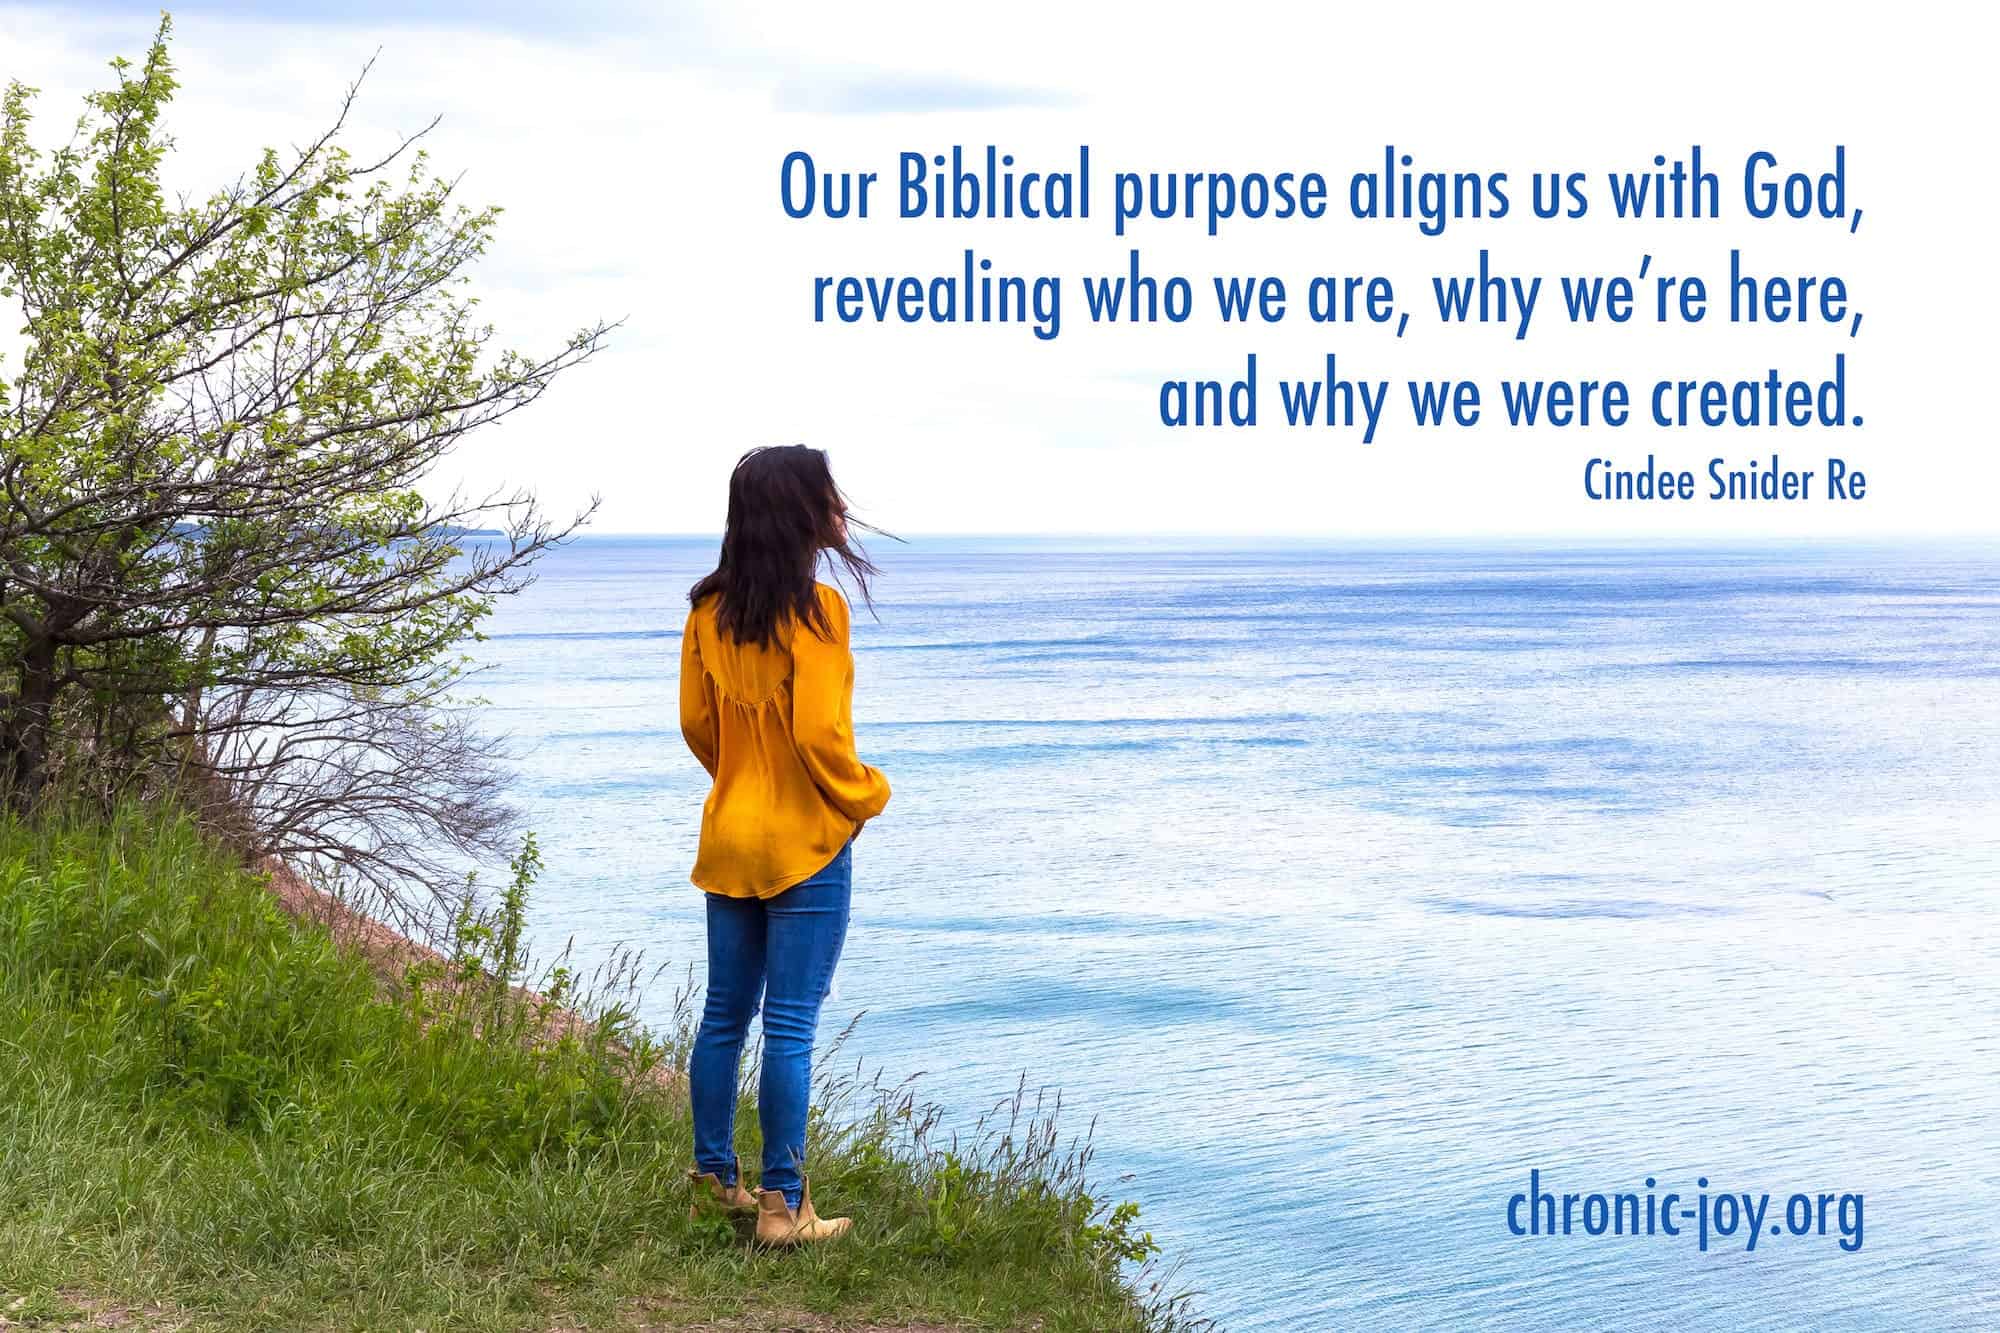 "Our Biblical purpose aligns us with God, revealing who we are, why we're here, and why we were created." Cindee Snider Re